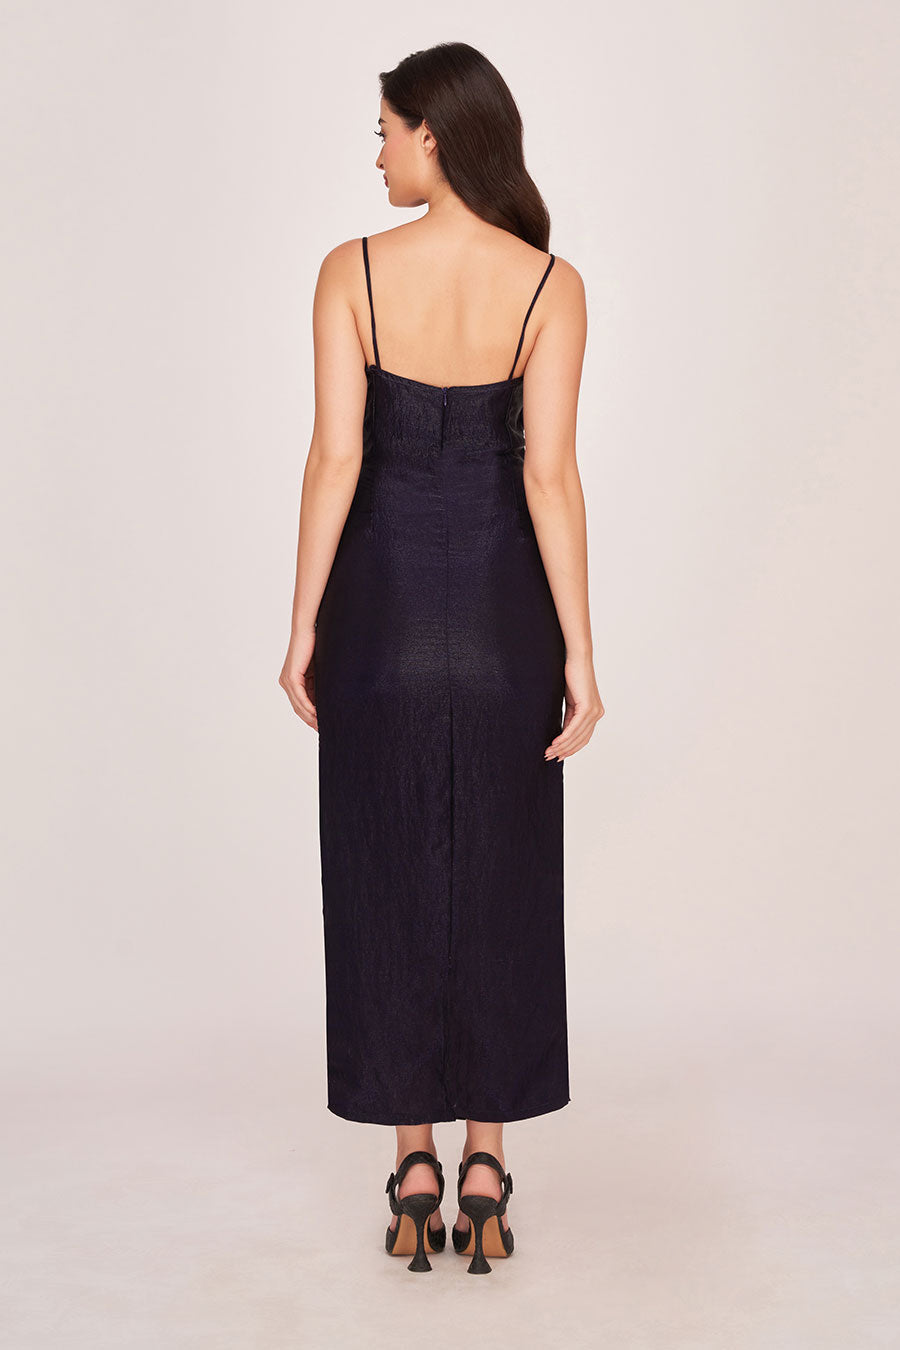 Dark Purple Ruched Cut-Out Long Dress